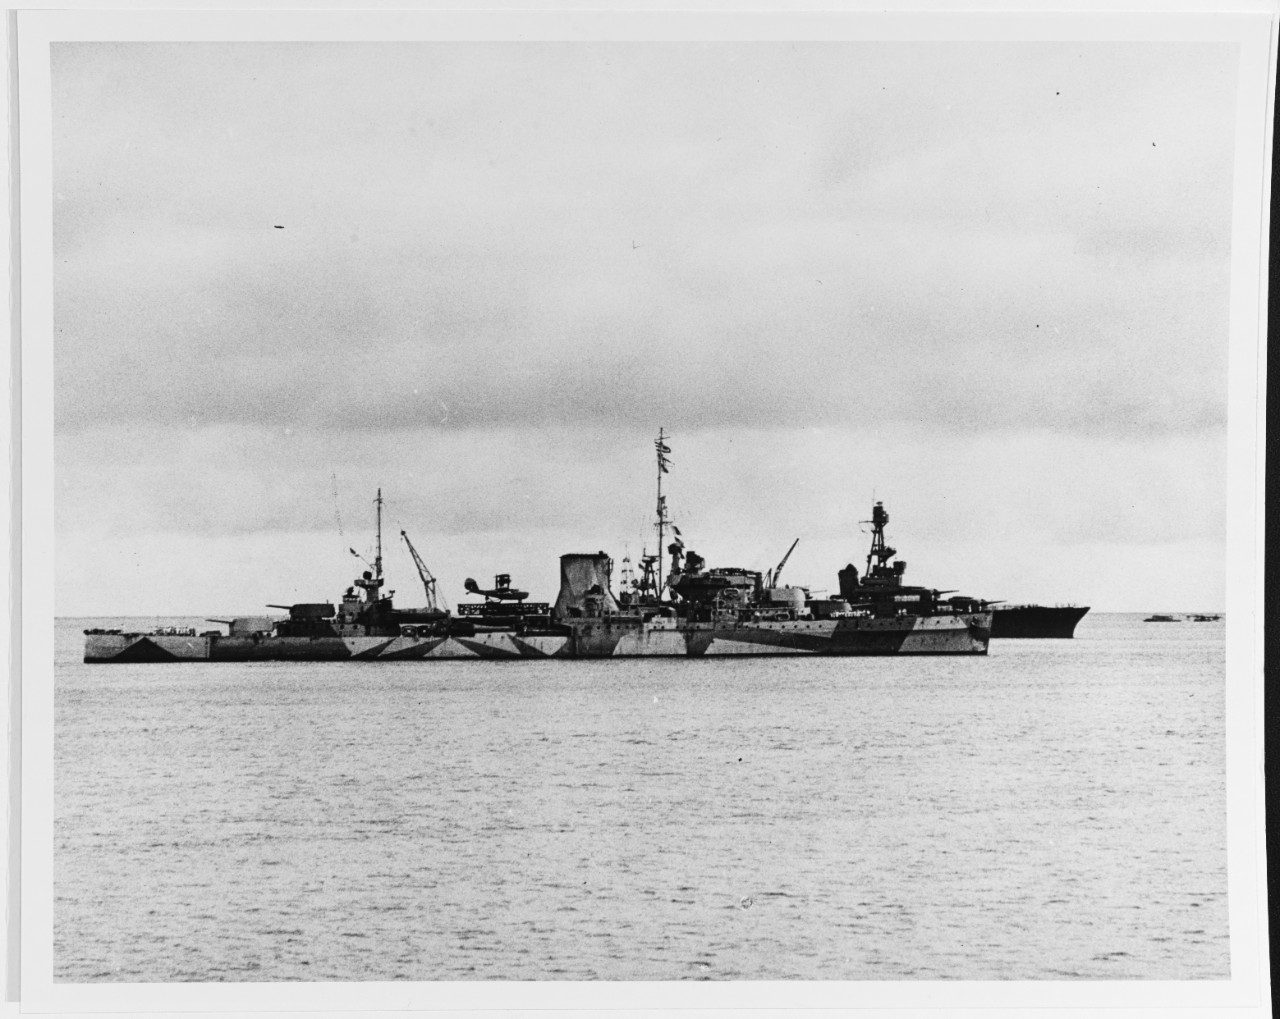 Chicago joins the ANZAC Squadron at Suva in the Fiji Islands in this picture taken from Curtiss, February 1942. Achilles faces the camera, and Chicago is visible just beyond the New Zealand light cruiser. A PBY Catalina is in the water in the distance. (U.S. Navy Photograph 80-G-7294, National Archives and Records Administration, Still Pictures Branch, College Park, Md.)